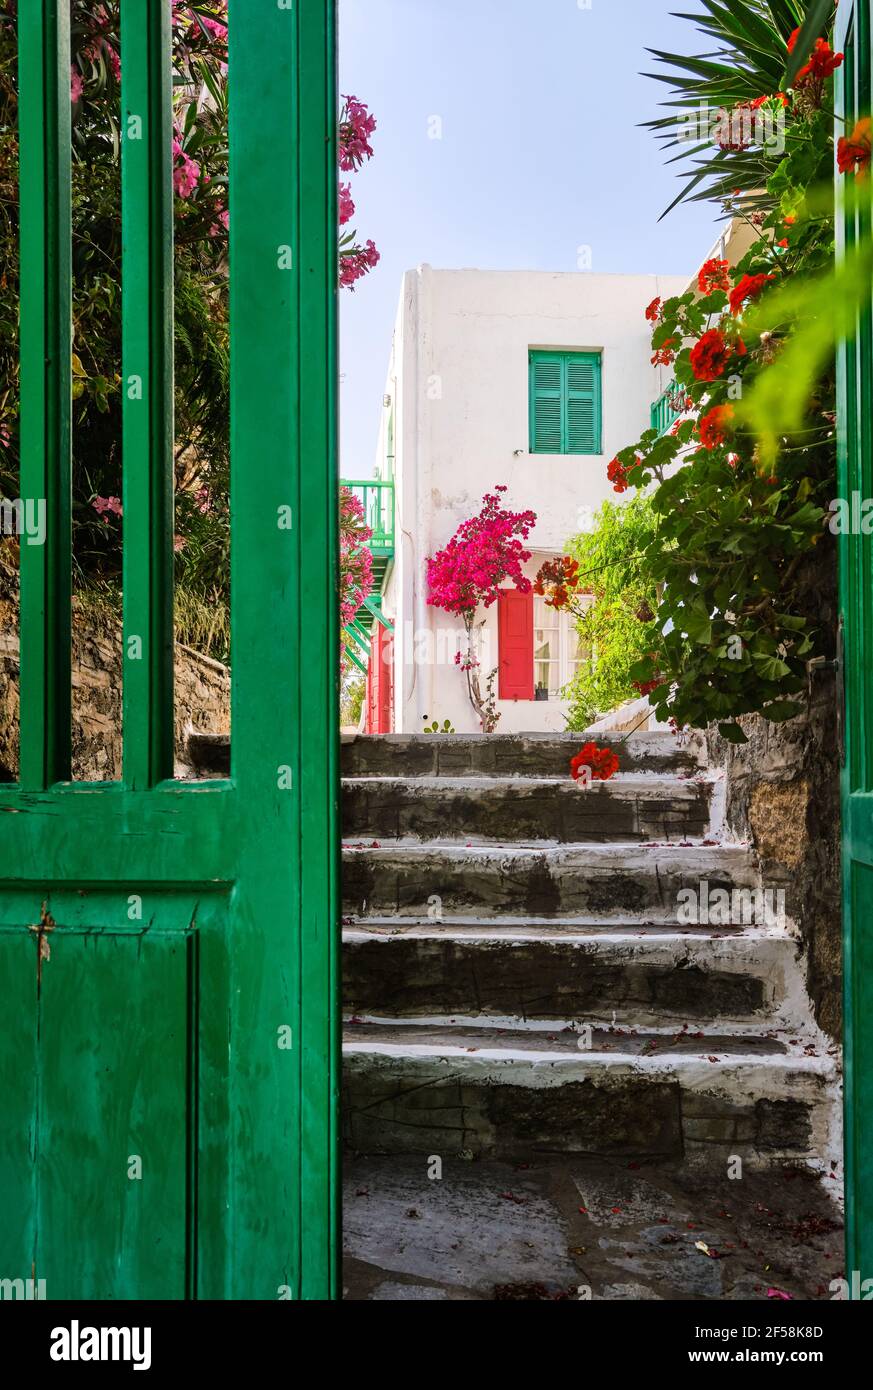 Entrance to traditional Greek island house. Whitewashed walls, pink bougainvillea, red and green storm shutters. Selective focus. Mykonos, Greece. Stock Photo